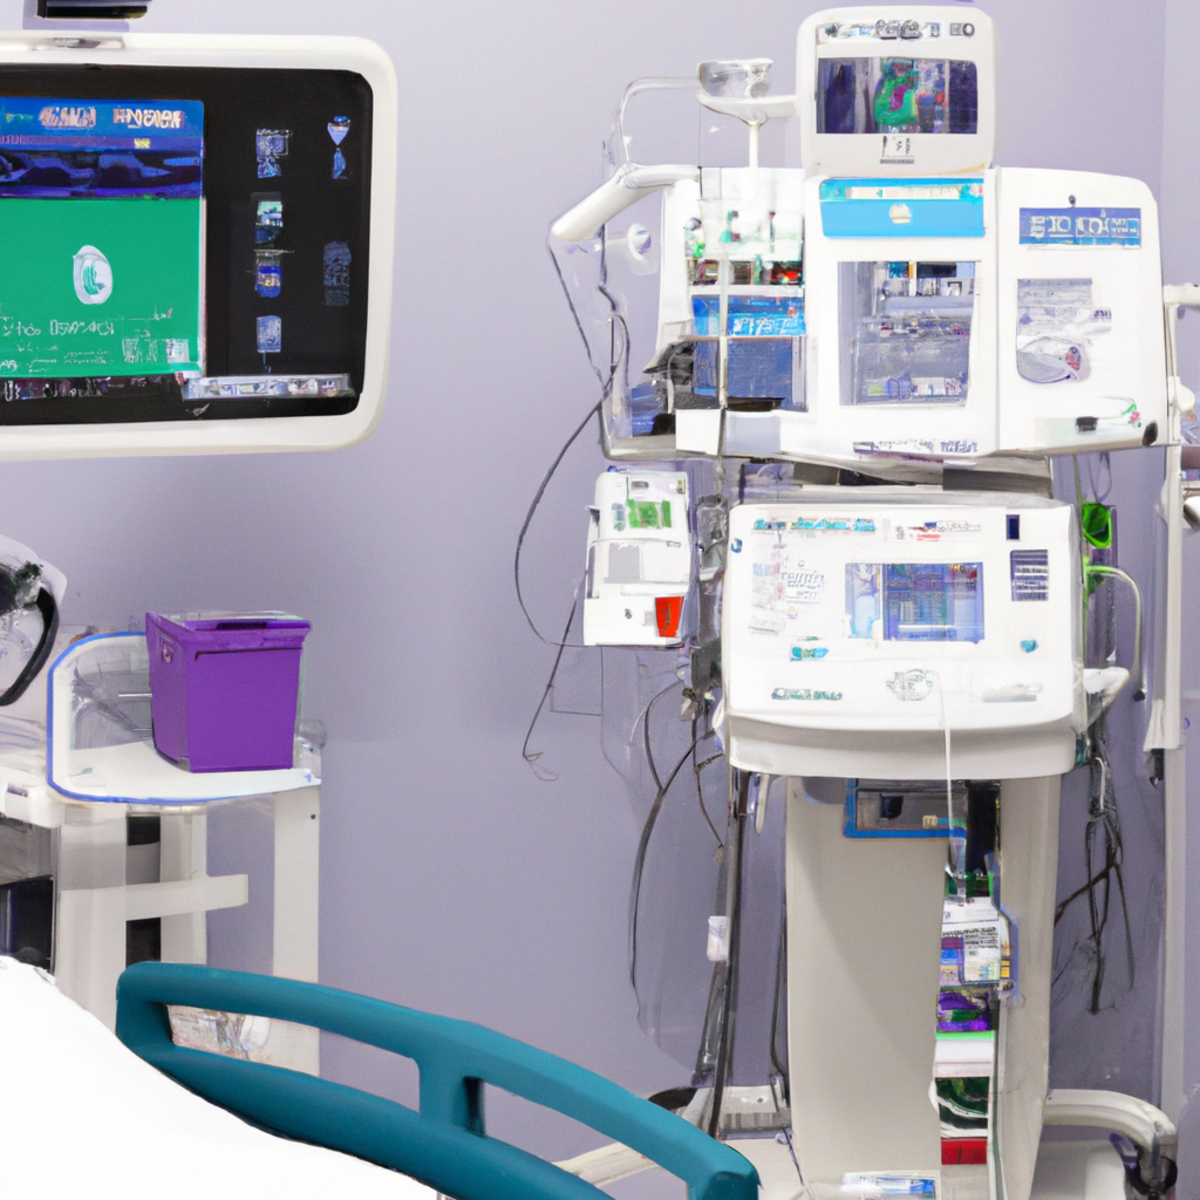 Modern hospital room with liver dialysis machine, monitor, medical instruments, and serene atmosphere - Budd-Chiari Syndrome